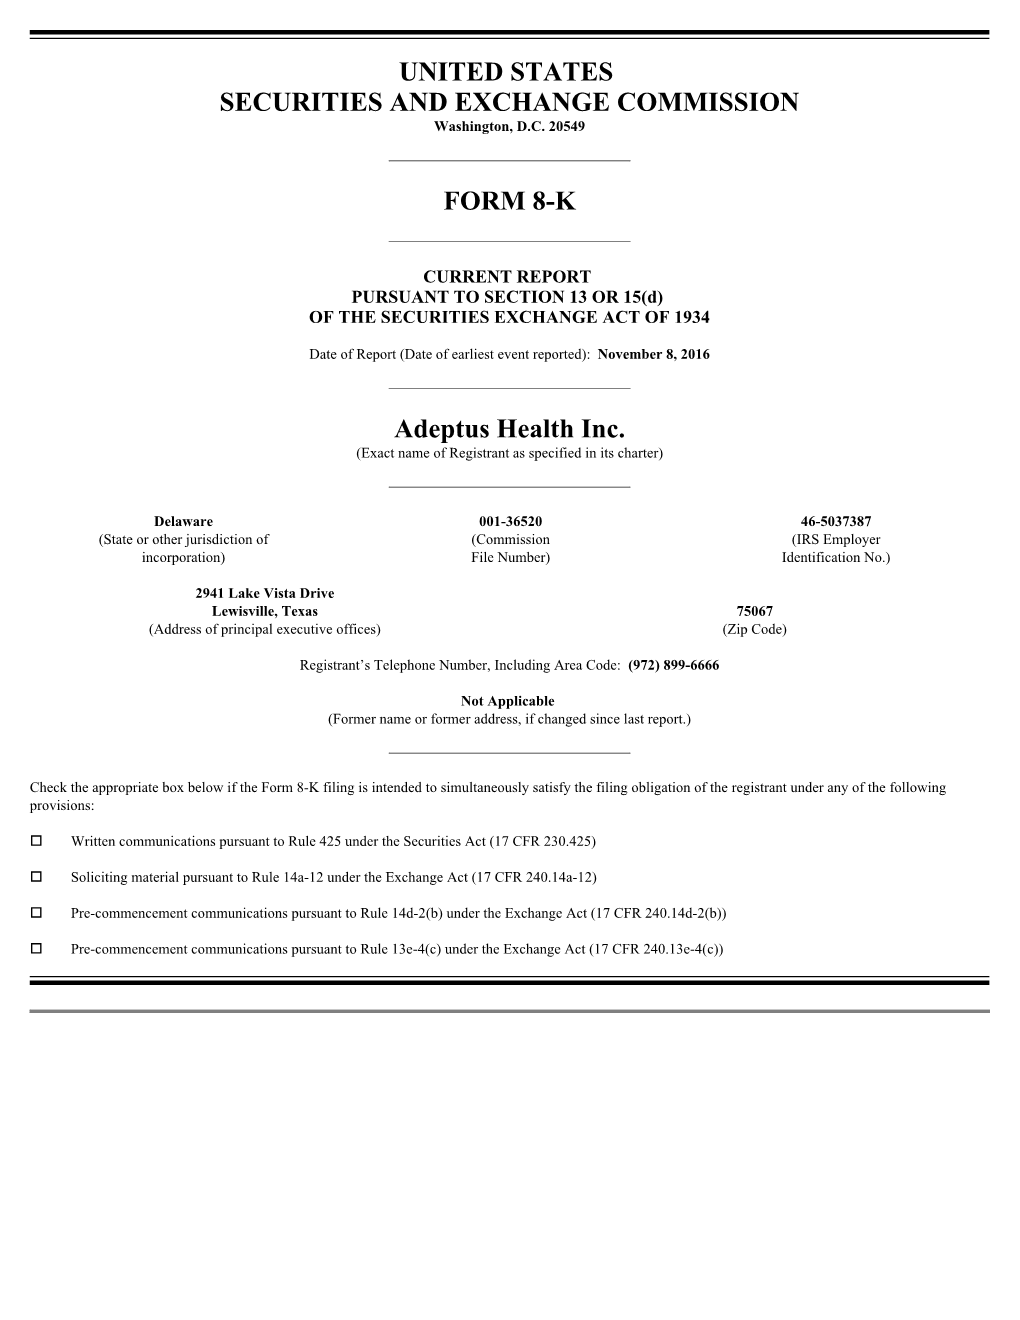 UNITED STATES SECURITIES and EXCHANGE COMMISSION FORM 8-K Adeptus Health Inc